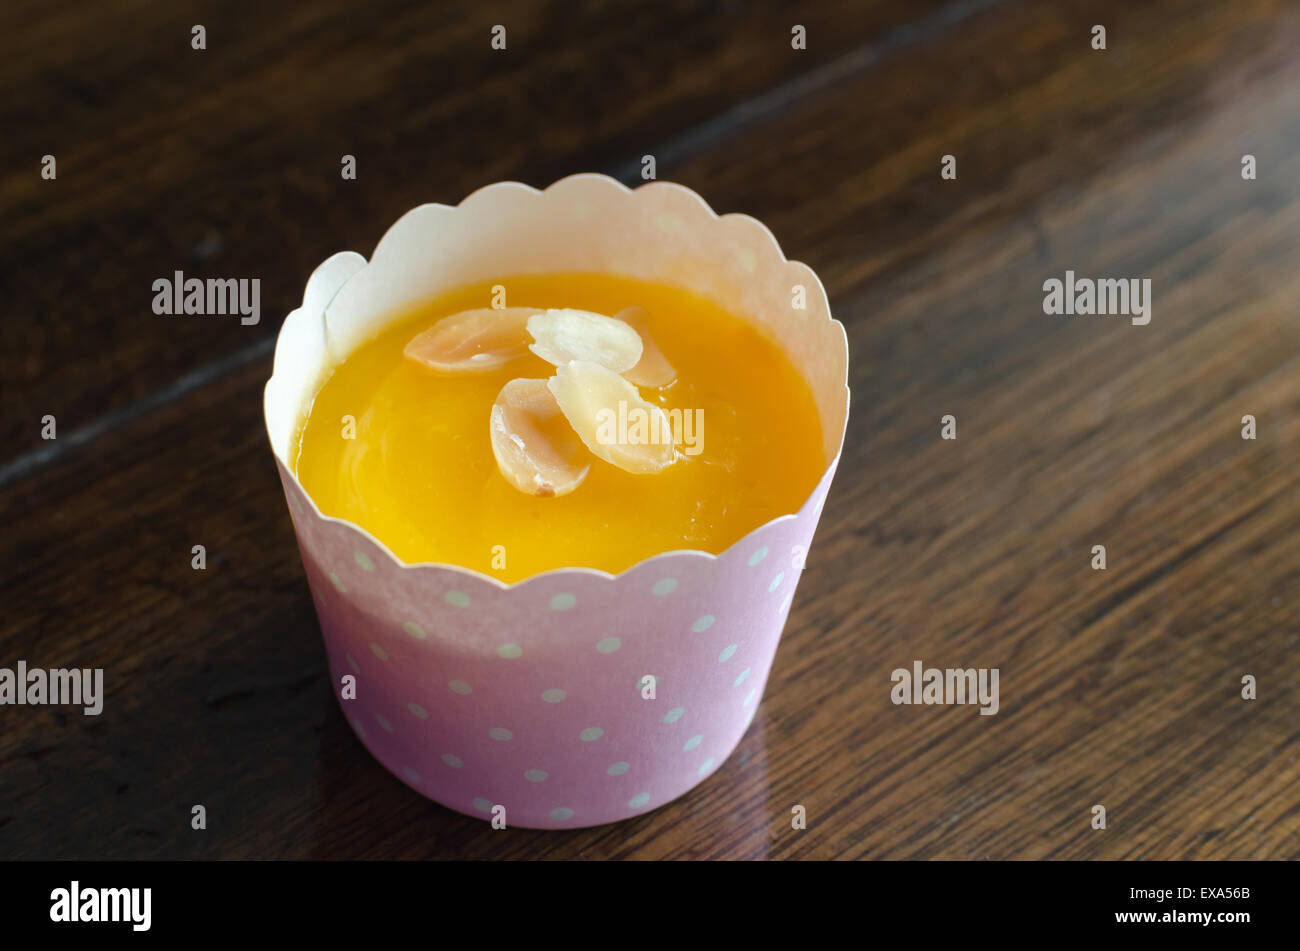 Cupcakes and sweet orange flavor on wood table. Stock Photo